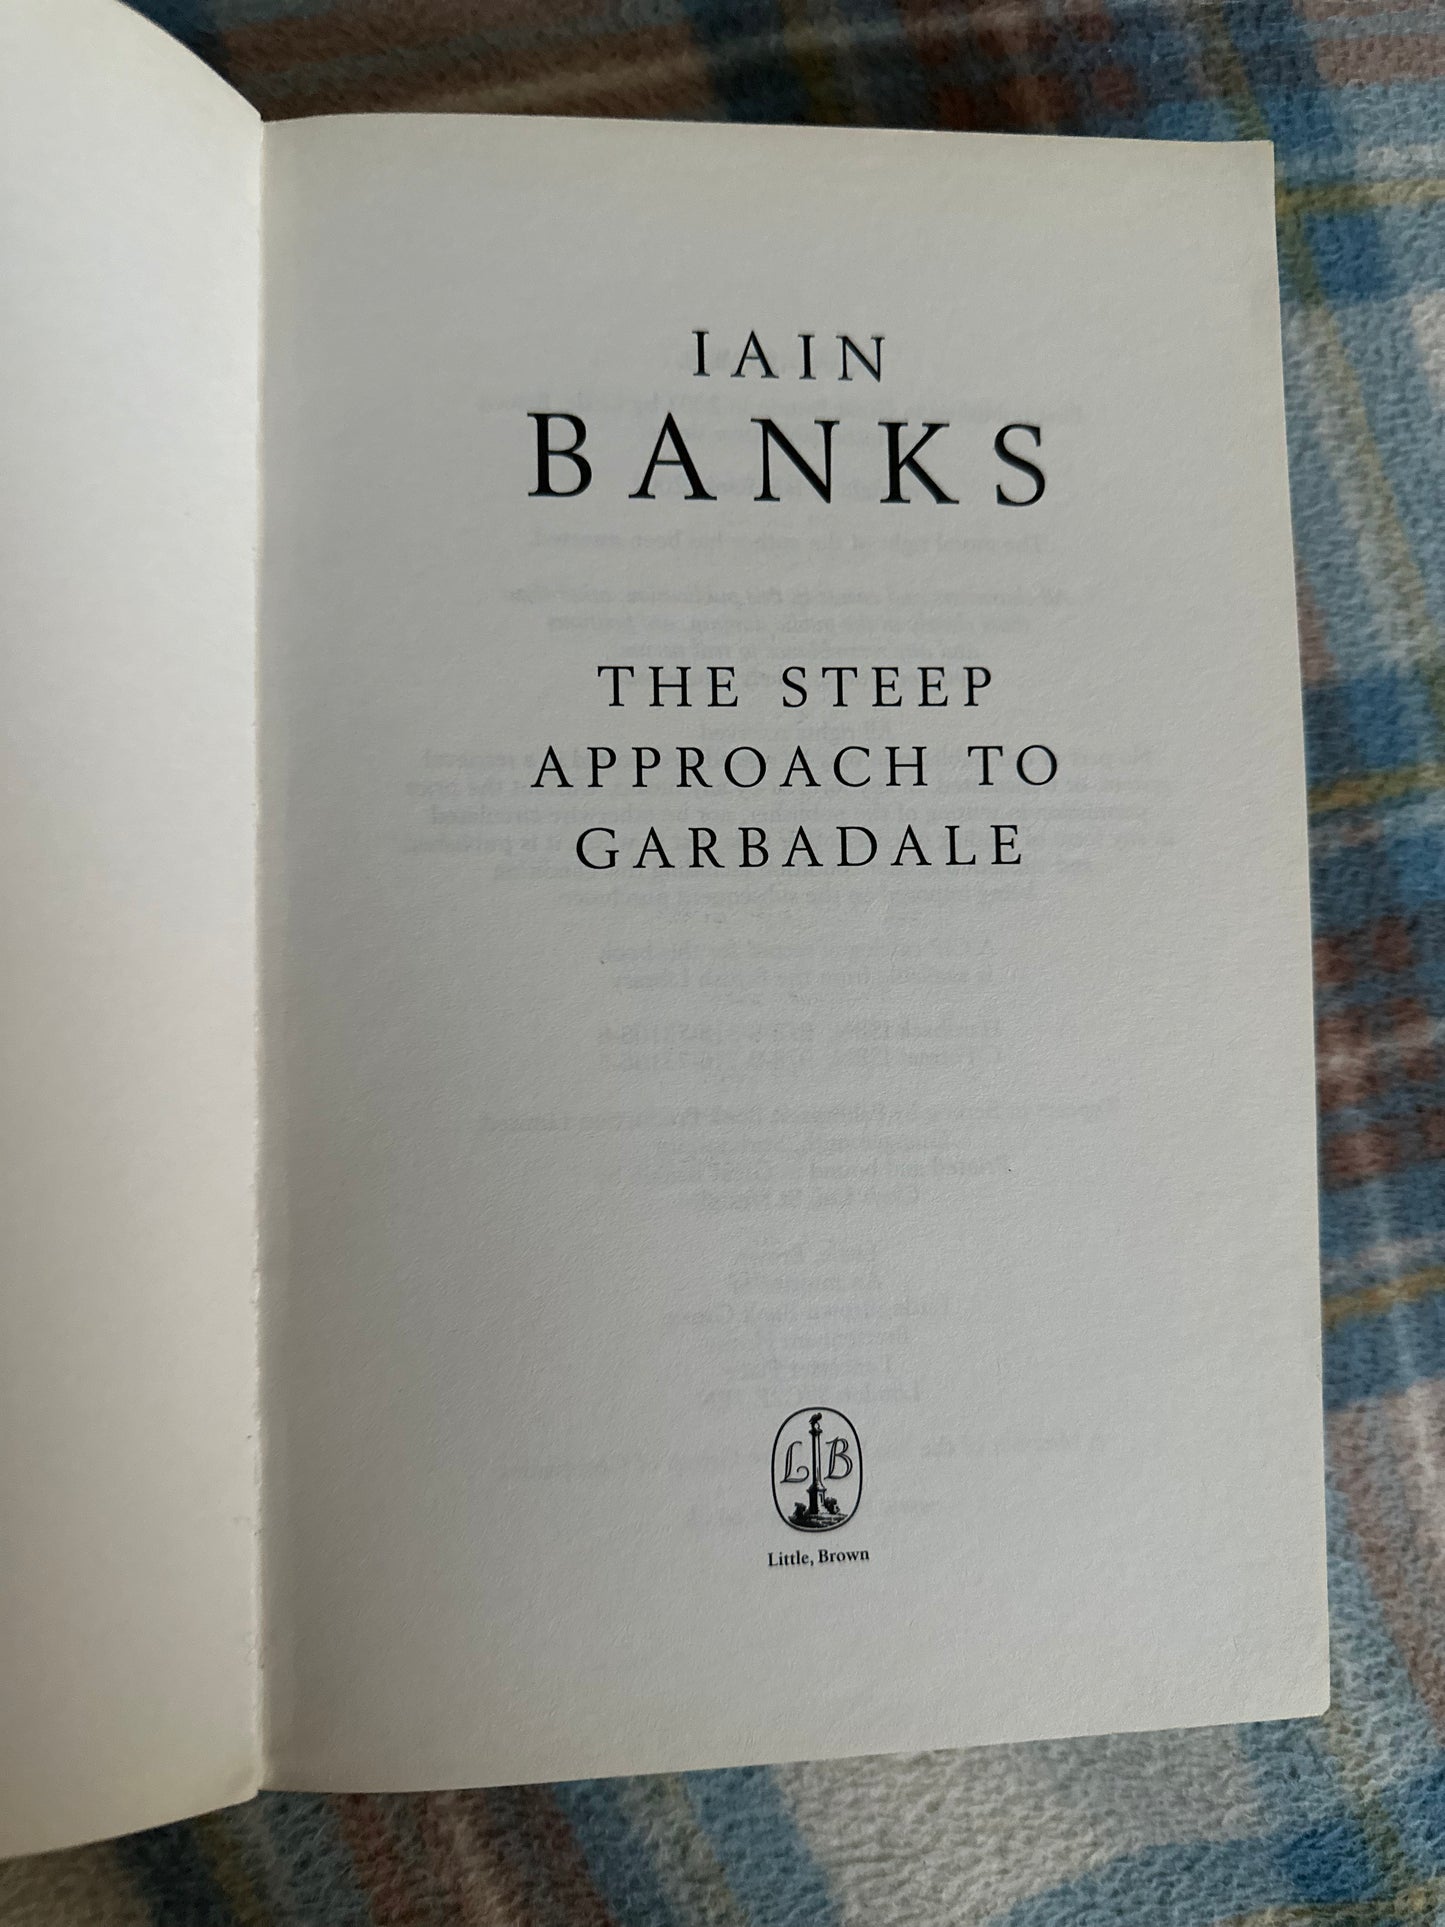 2007 The Steep Approach To Garbadale - Iain Banks(Little Brown